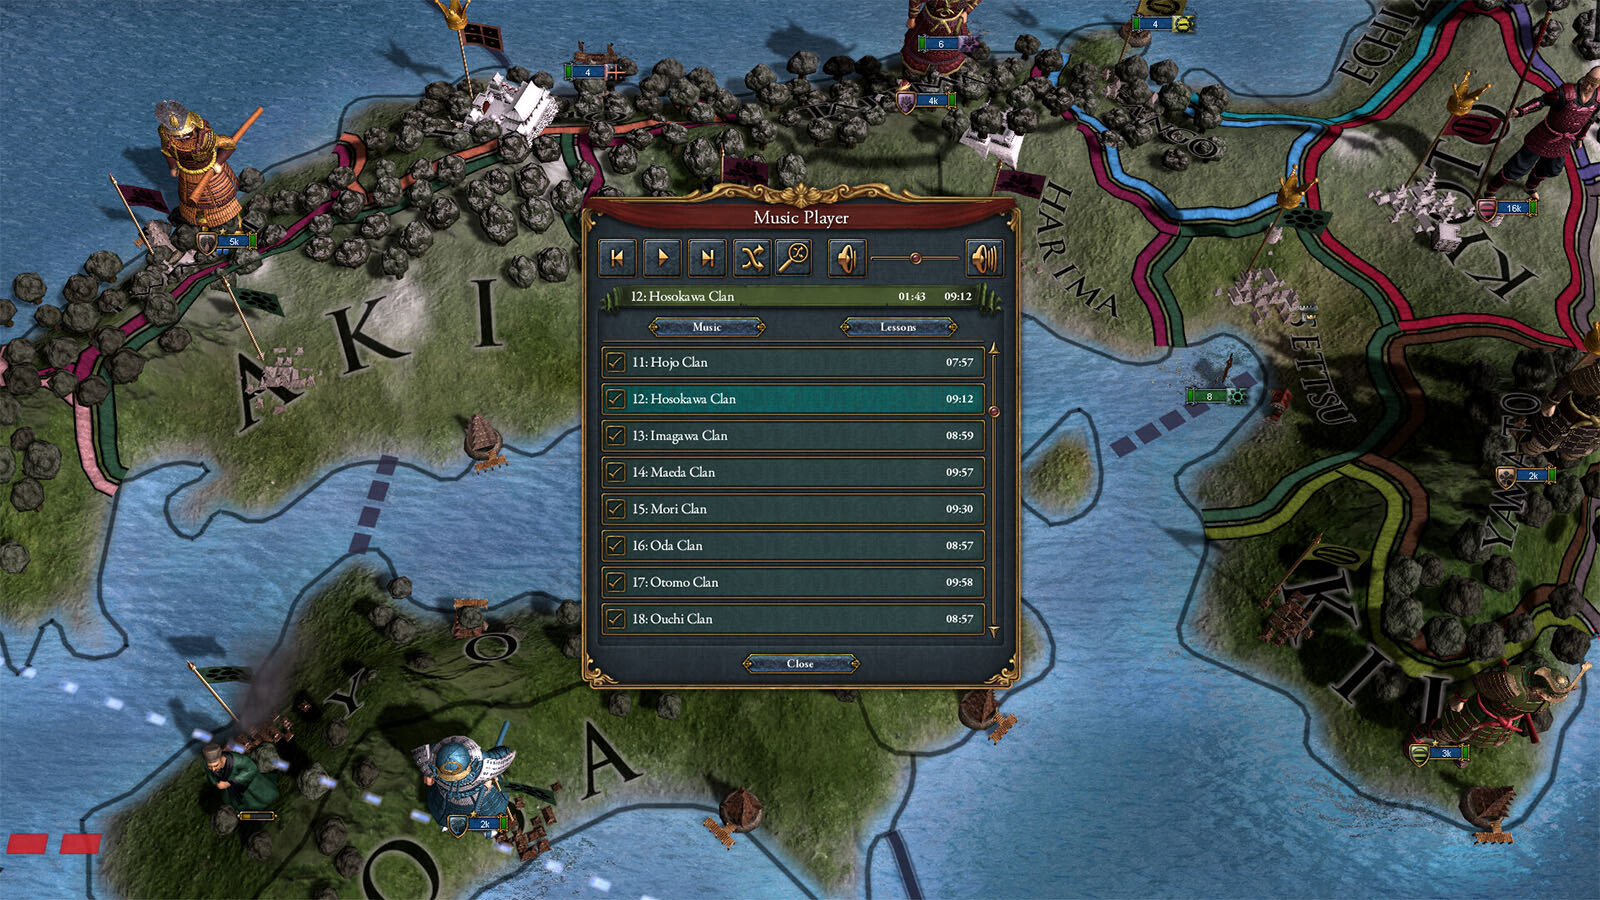 Collections: Teaching Paradox, Europa Universalis IV, Part I